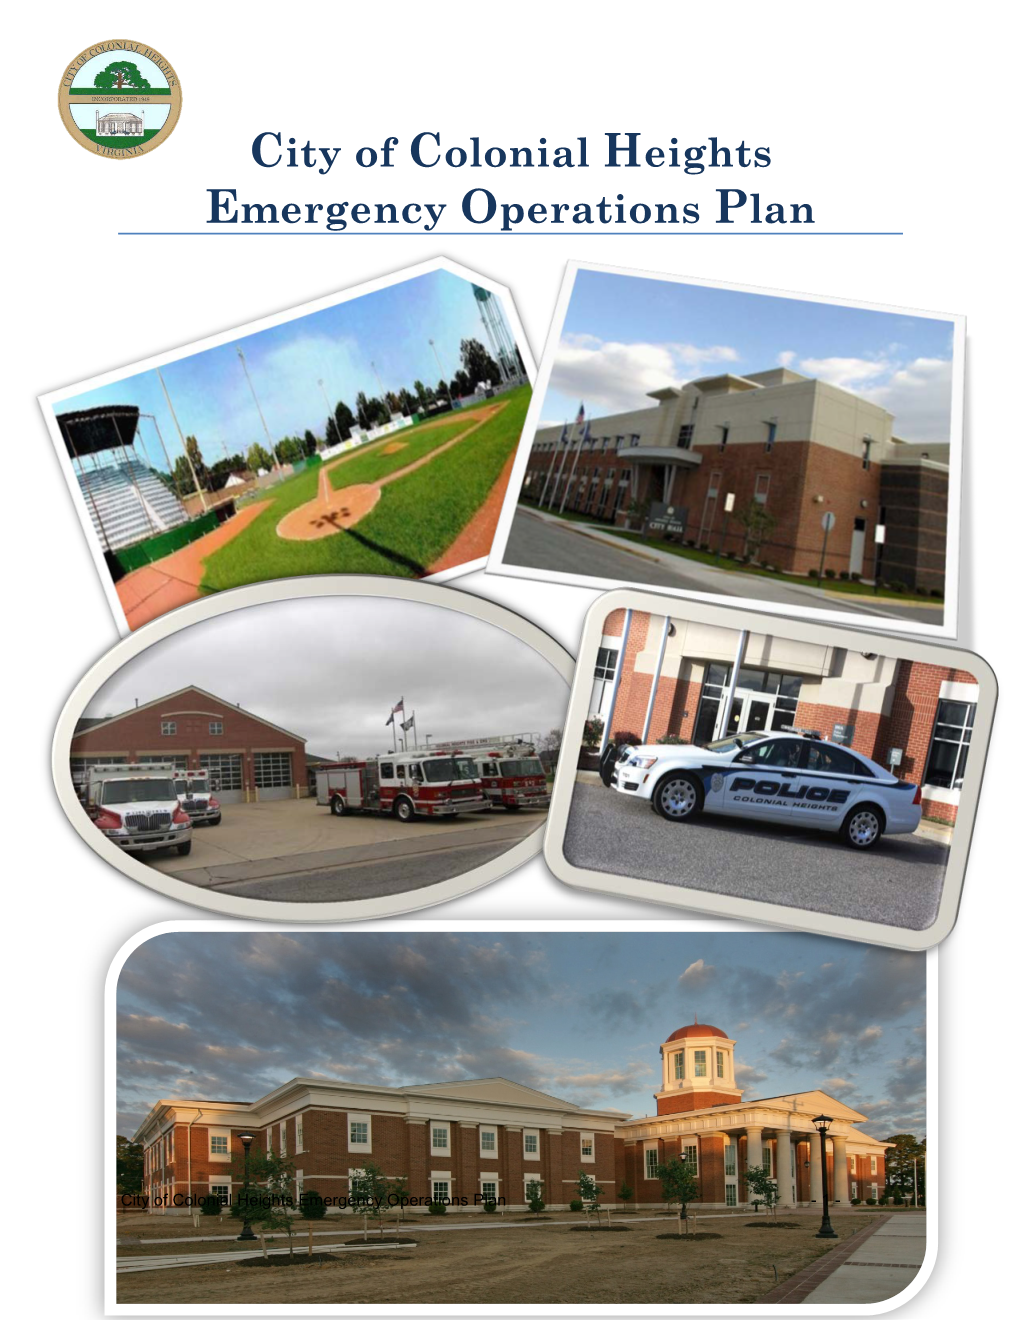 City of Colonial Heights Emergency Operations Plan